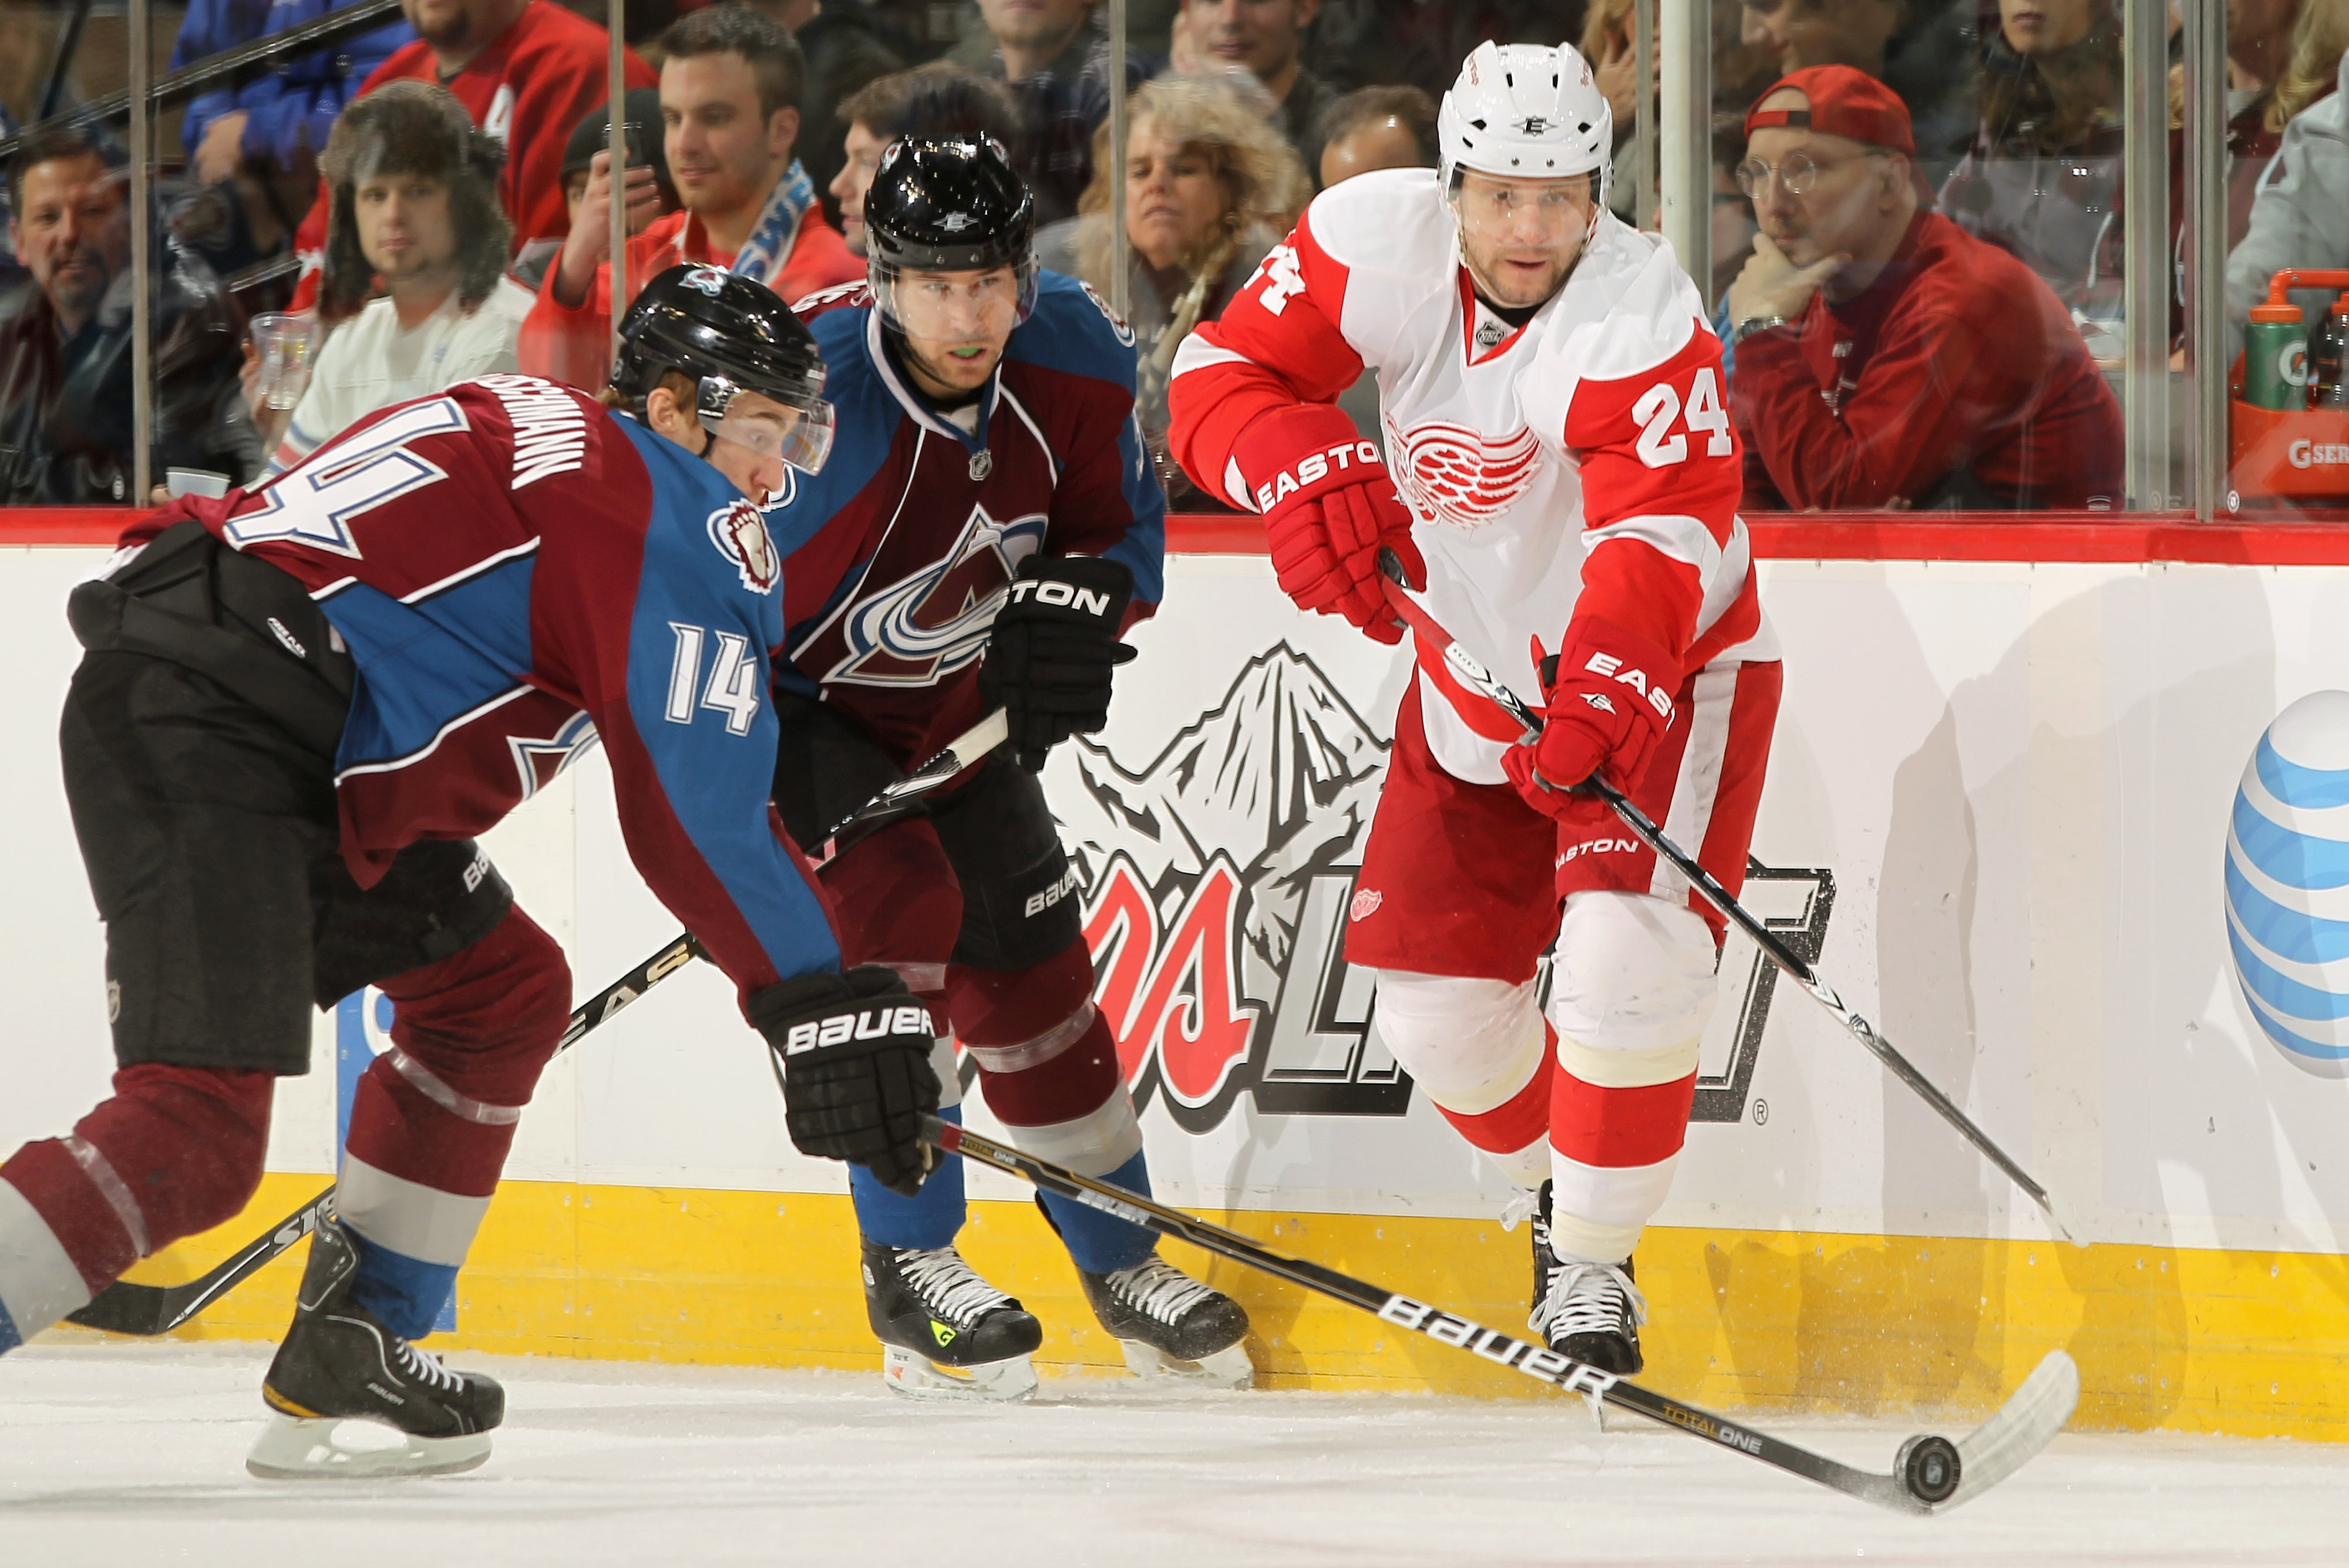 DENVER, CO - JANUARY 10:  Ruslan Salei #24 of the Detroit Red Wings passes the puck past Tomas Fleischmann #14 of the Colorado Avalanche at the Pepsi Center on January 10, 2011 in Denver, Colorado.  (Photo by Doug Pensinger/Getty Images)